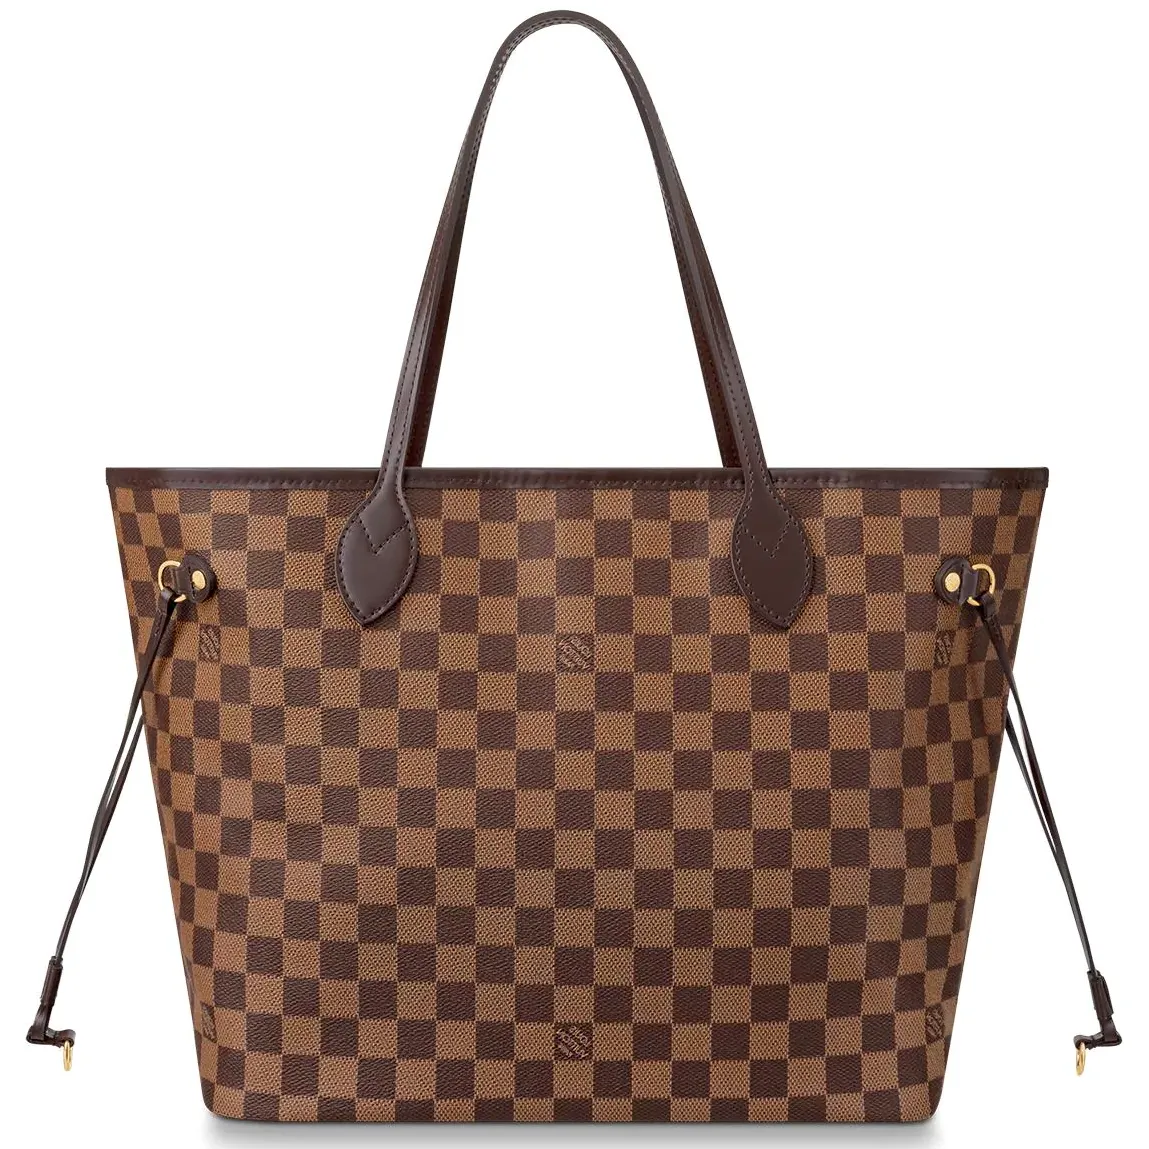 Free Louis Vuitton Bag Worth Â£1,400 For Winners